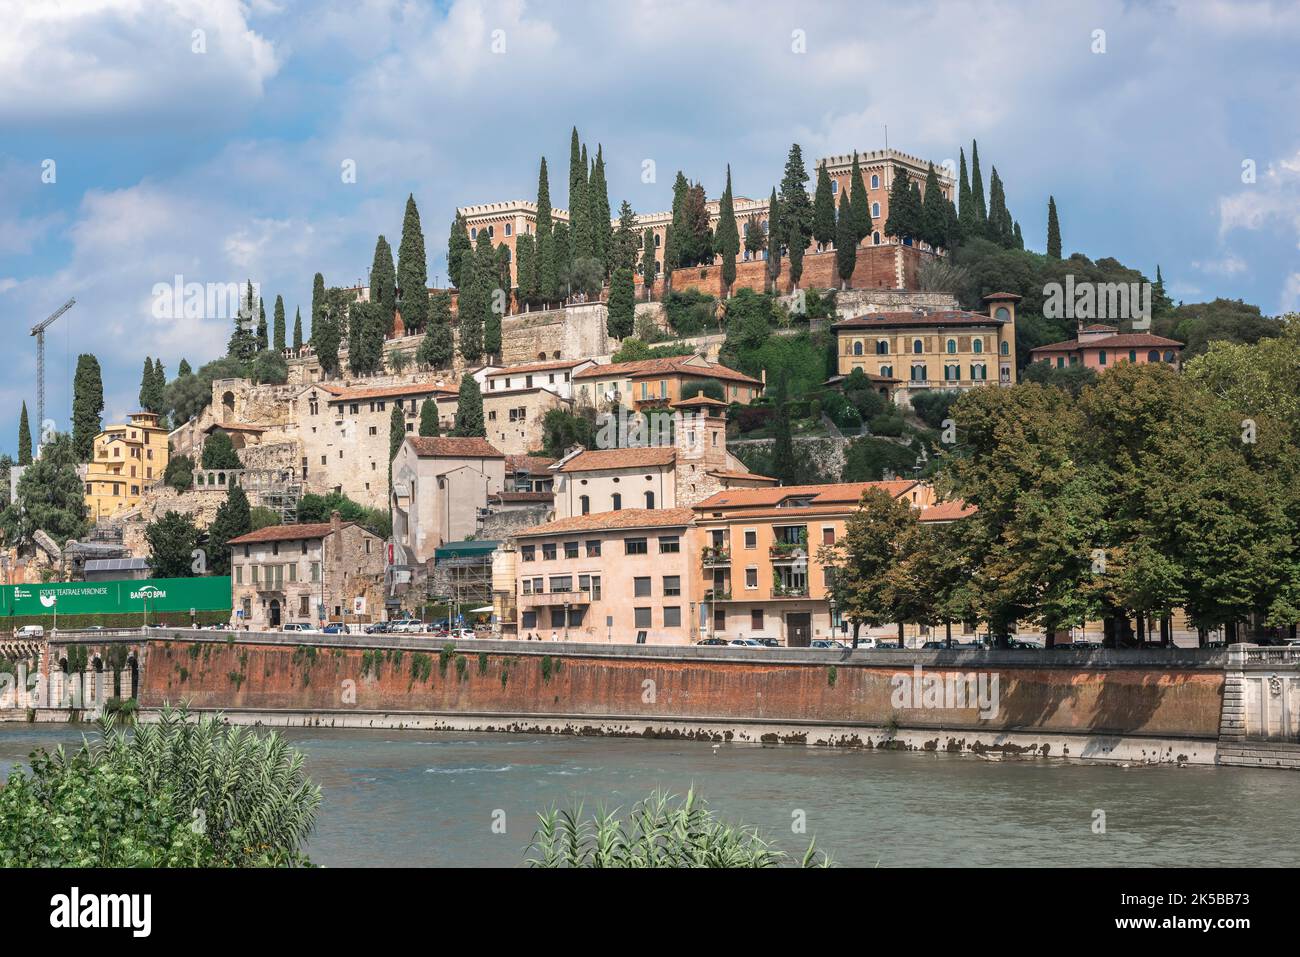 San Pietro Verona, view of historic buildings sited on San Pietro Hill located on the north bank of the River Adige in the city of Verona, Italy Stock Photo